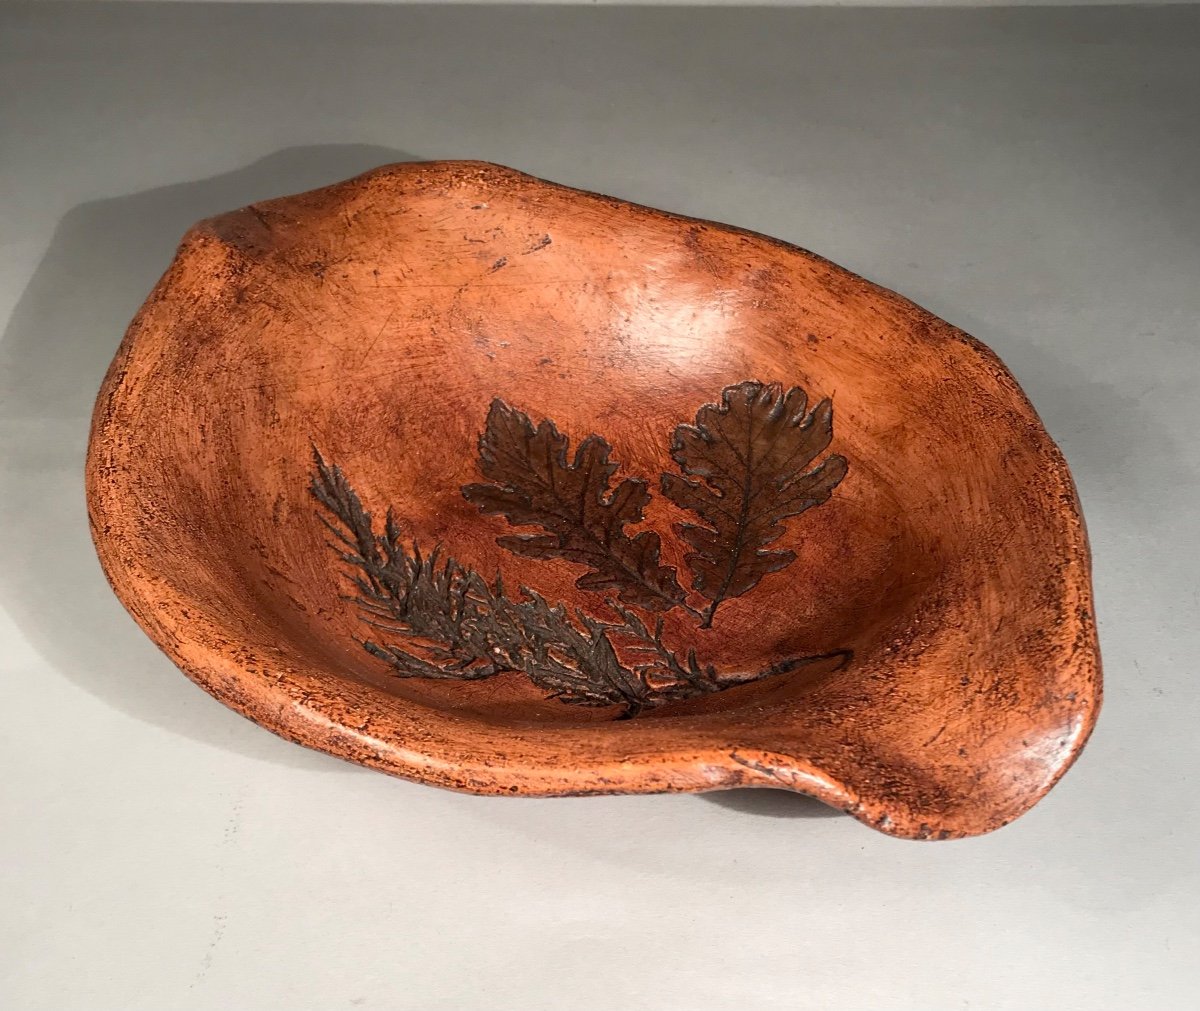 Popular Art Patinated Terracotta Dish With Plant Imprints Early 20th Century Haute-provence-photo-2